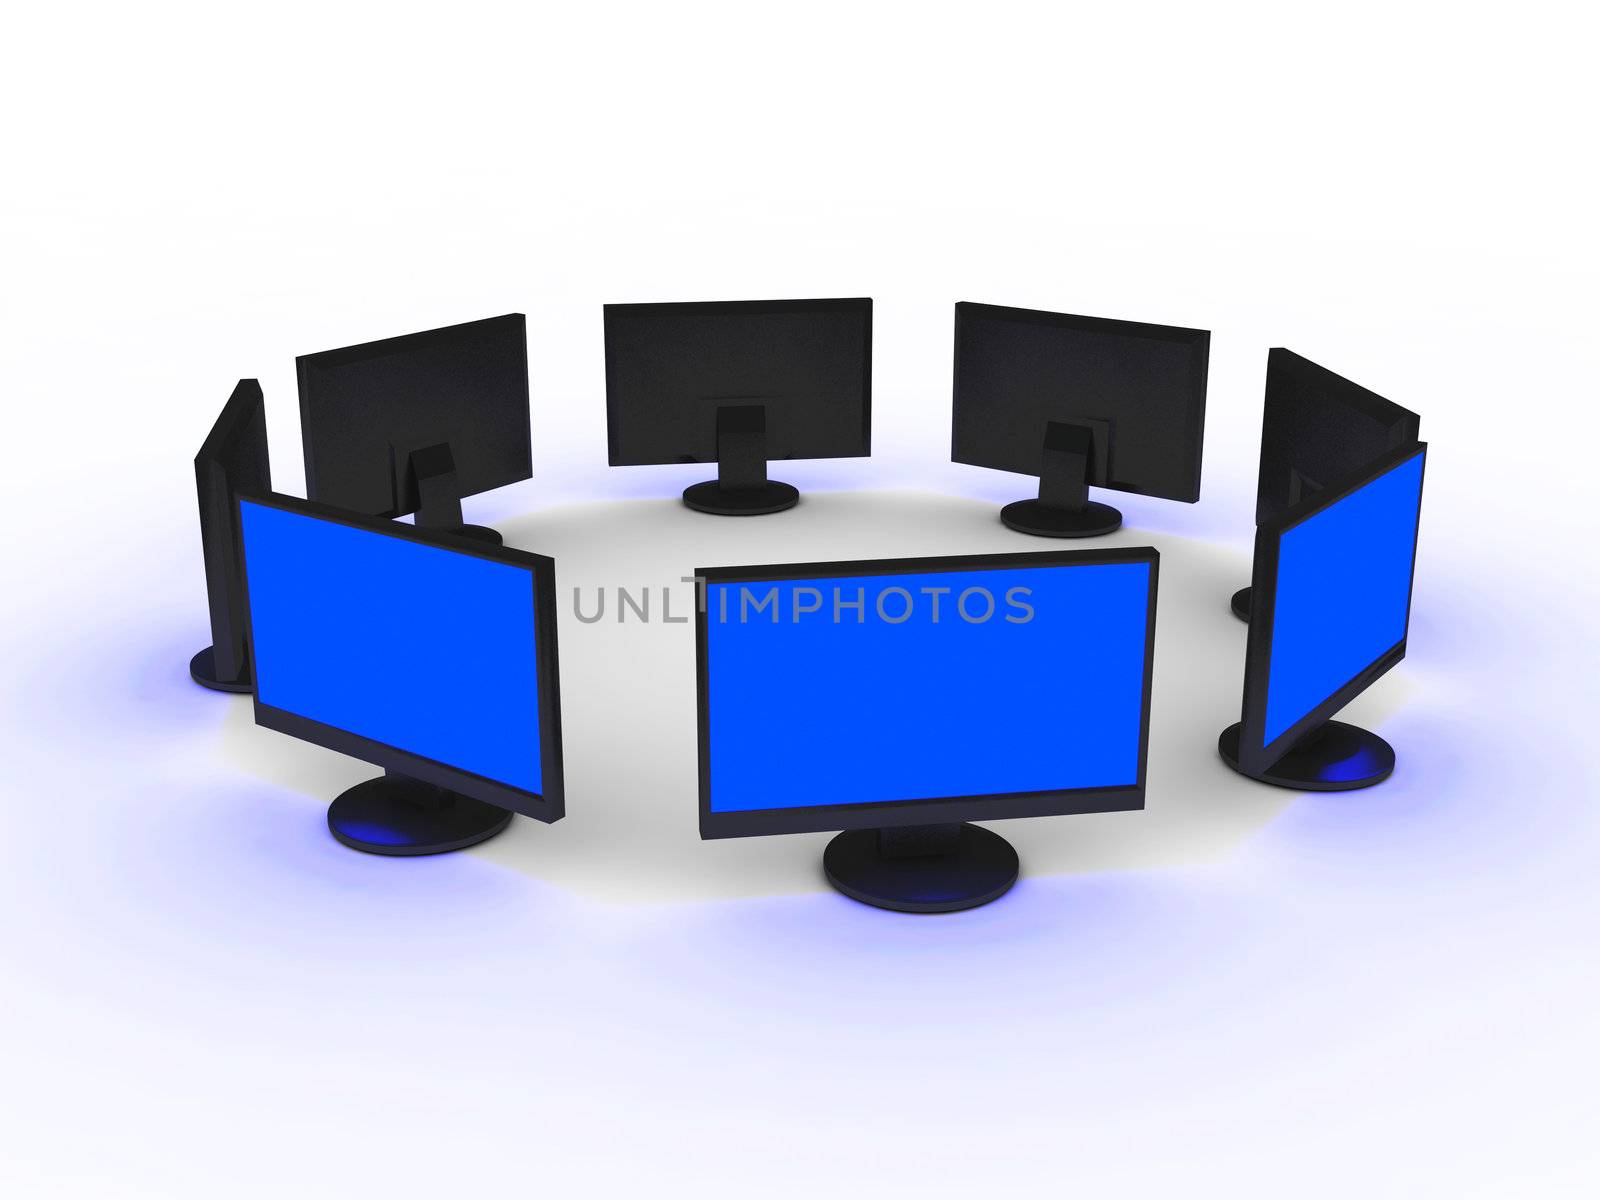 Monitors with dark blue screens on a white background